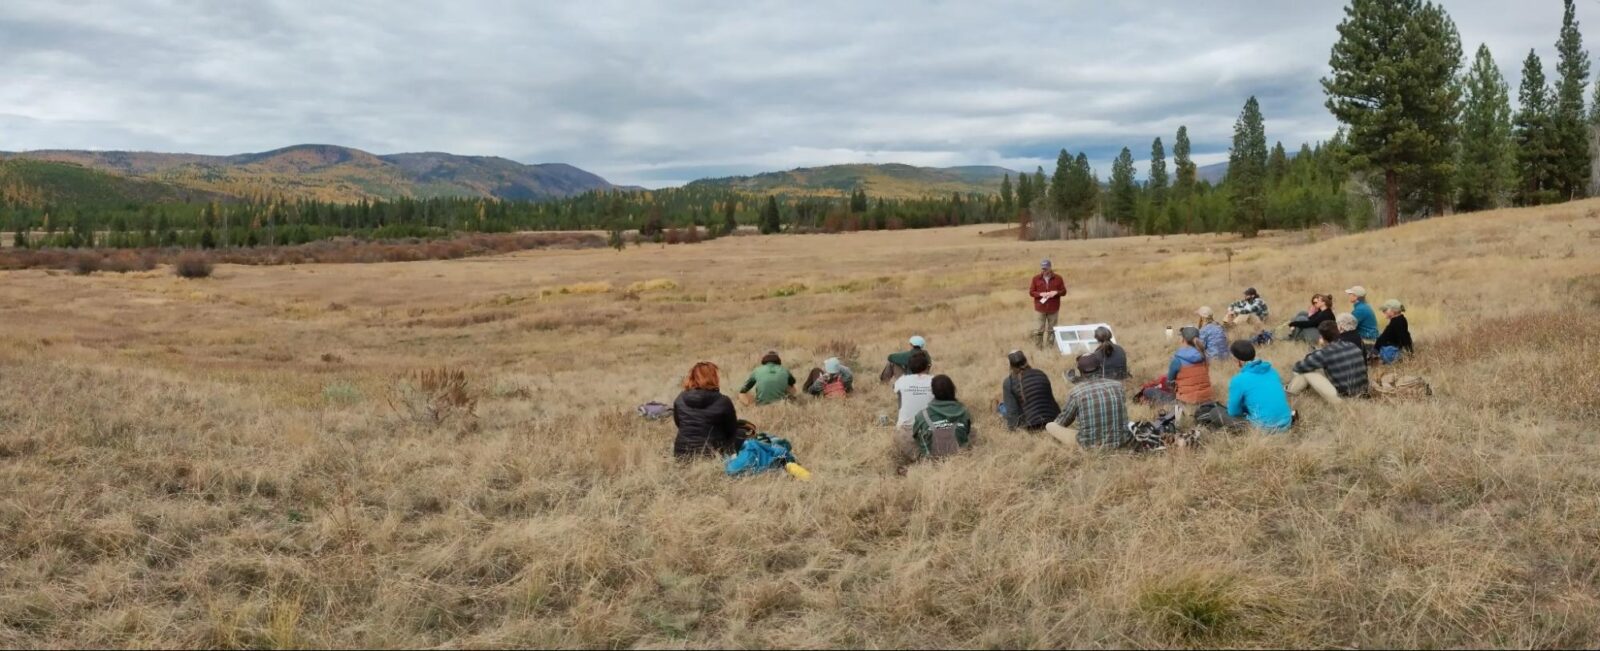 A group of people sit in a large field, mountains are seen in the distance.